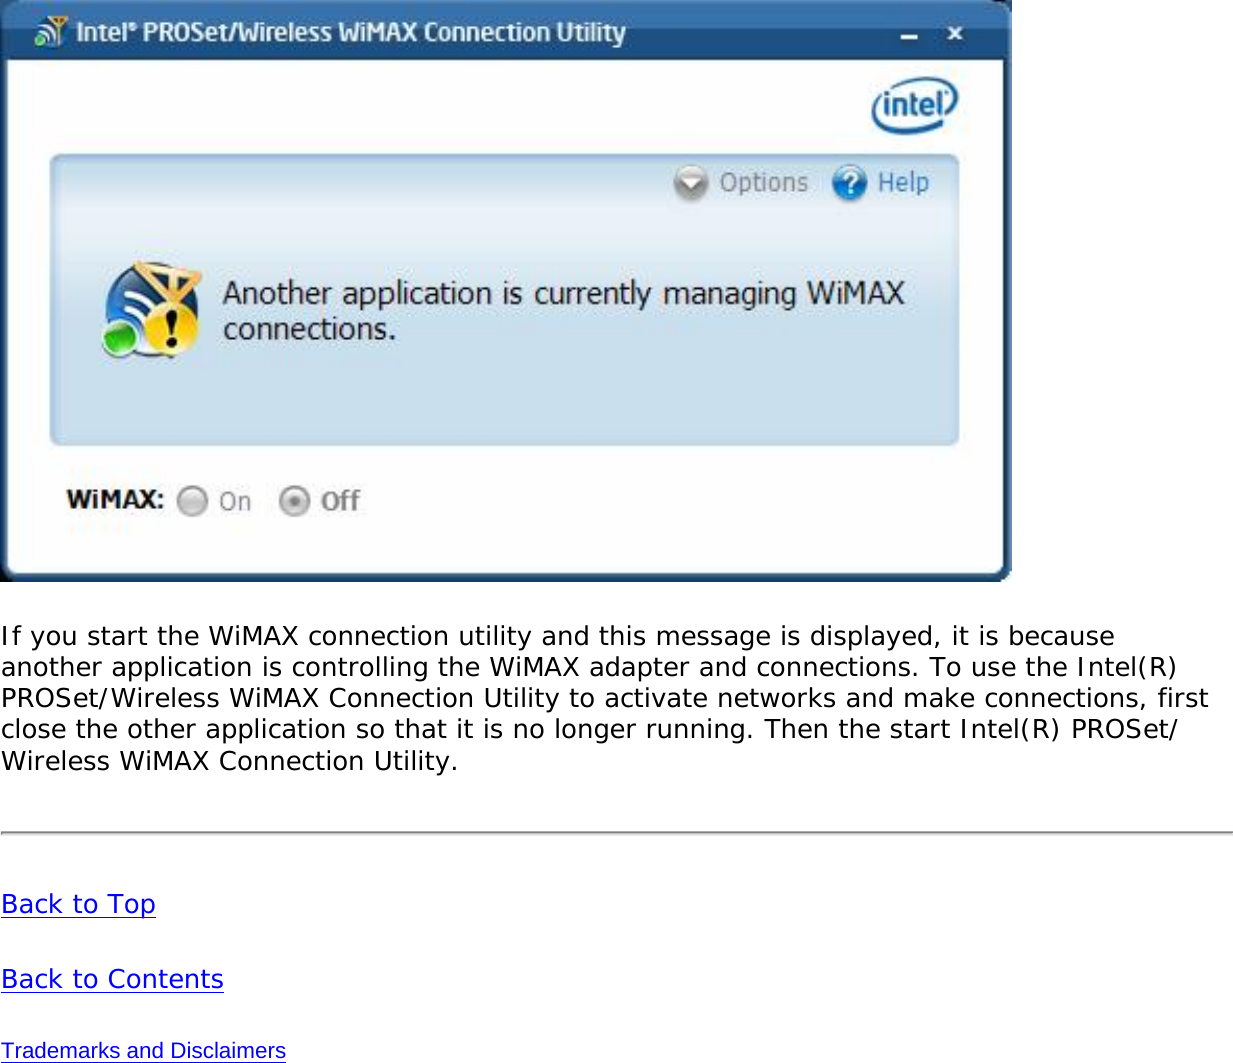 If you start the WiMAX connection utility and this message is displayed, it is because another application is controlling the WiMAX adapter and connections. To use the Intel(R) PROSet/Wireless WiMAX Connection Utility to activate networks and make connections, first close the other application so that it is no longer running. Then the start Intel(R) PROSet/Wireless WiMAX Connection Utility. Back to TopBack to ContentsTrademarks and Disclaimers